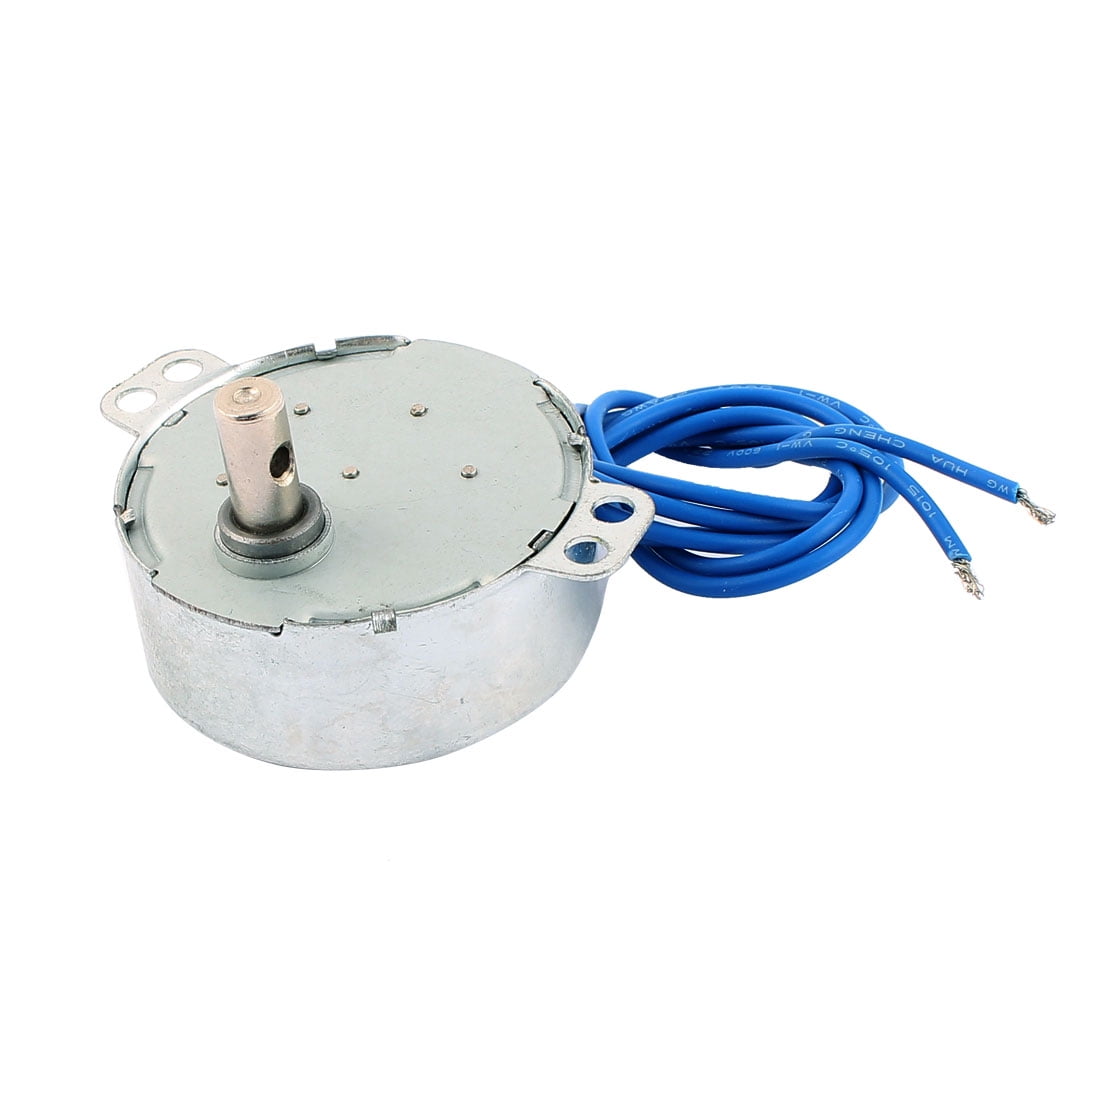 CCW/CW Direction 50/60Hz Frequency 8-10RPM Synchronous Motor AC 220-240V 4W TOOGOO R